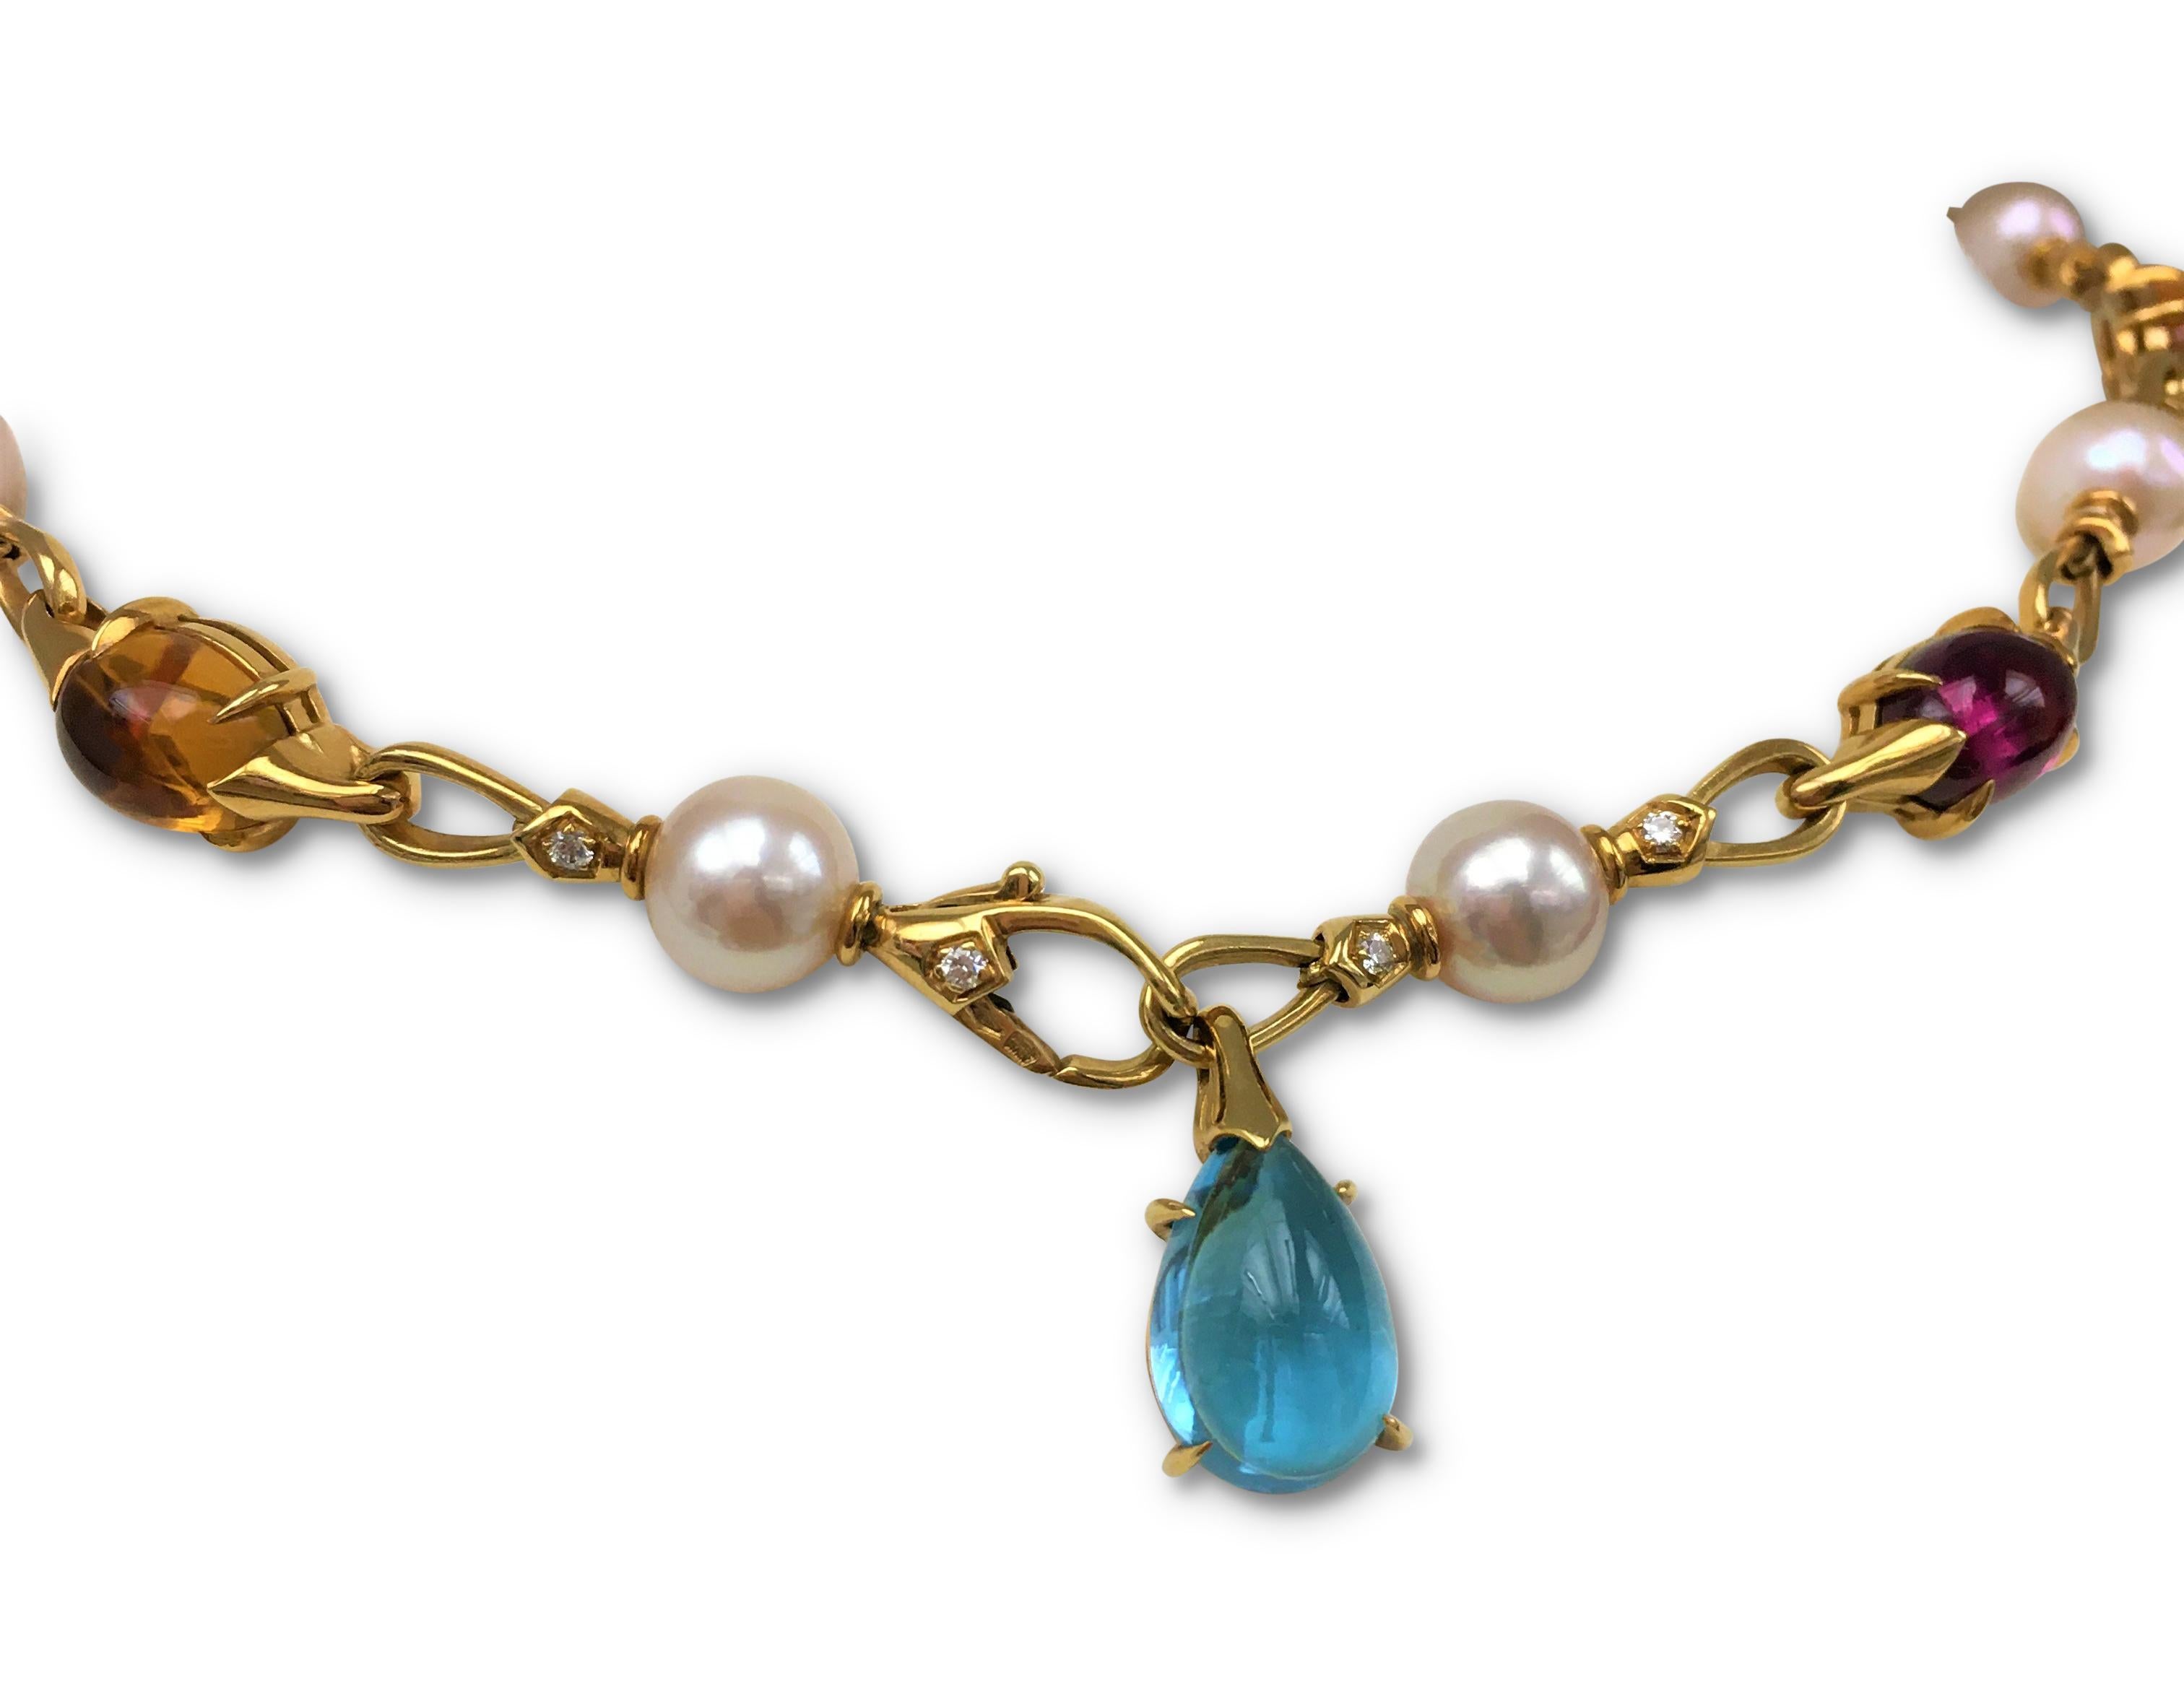 Authentic Bulgari Allegra necklace crafted in 18 karat yellow gold and set with cabochon-cut blue topaz, citrine, and tourmaline stones alternating with cultured pearls. The necklace links are accented with round brilliant cut diamonds weighing an